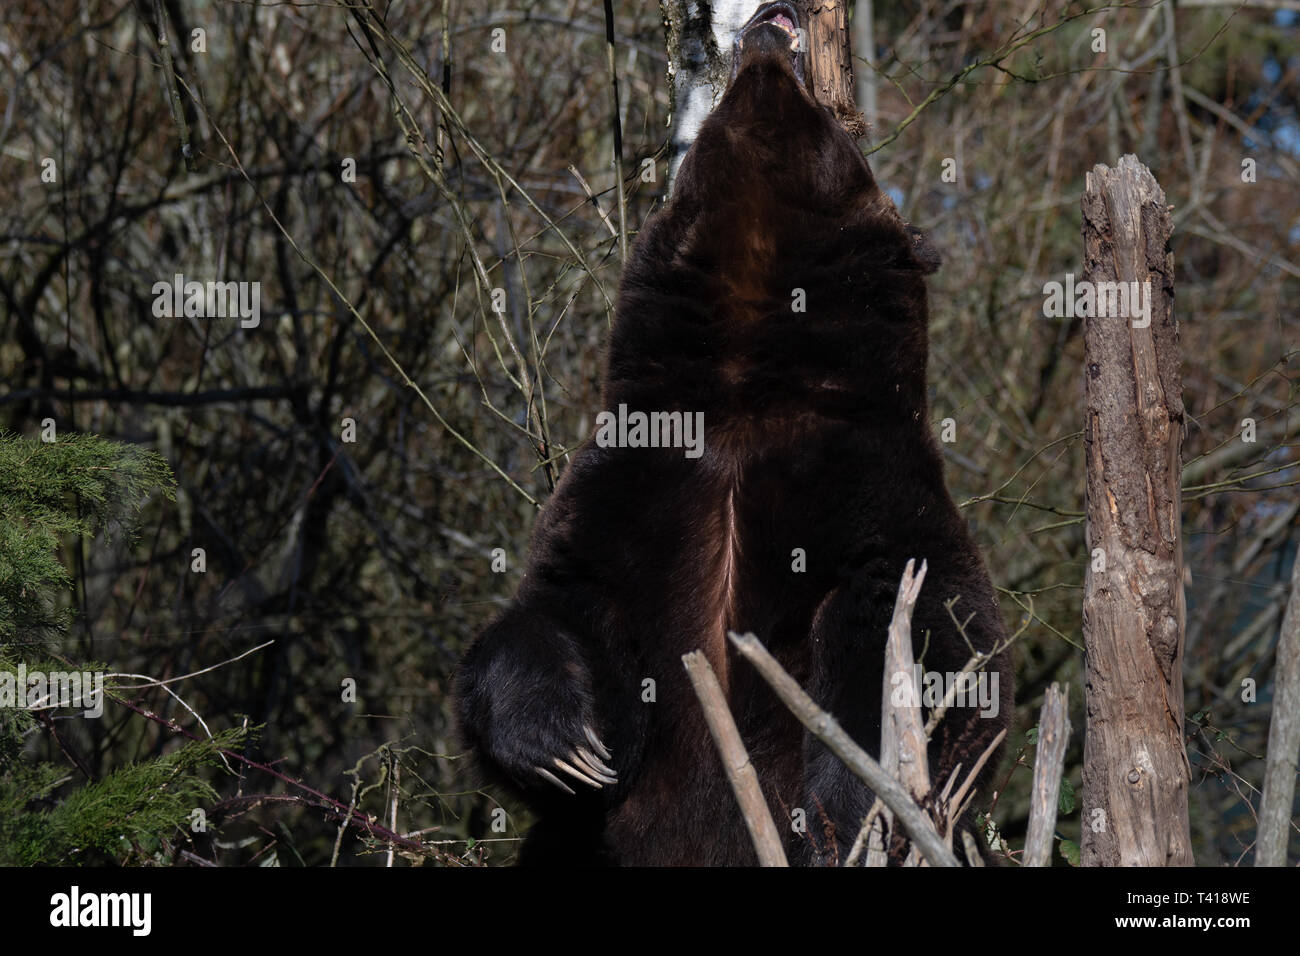 Grizzly bear scratching its back on a tree trunk, United States Stock Photo